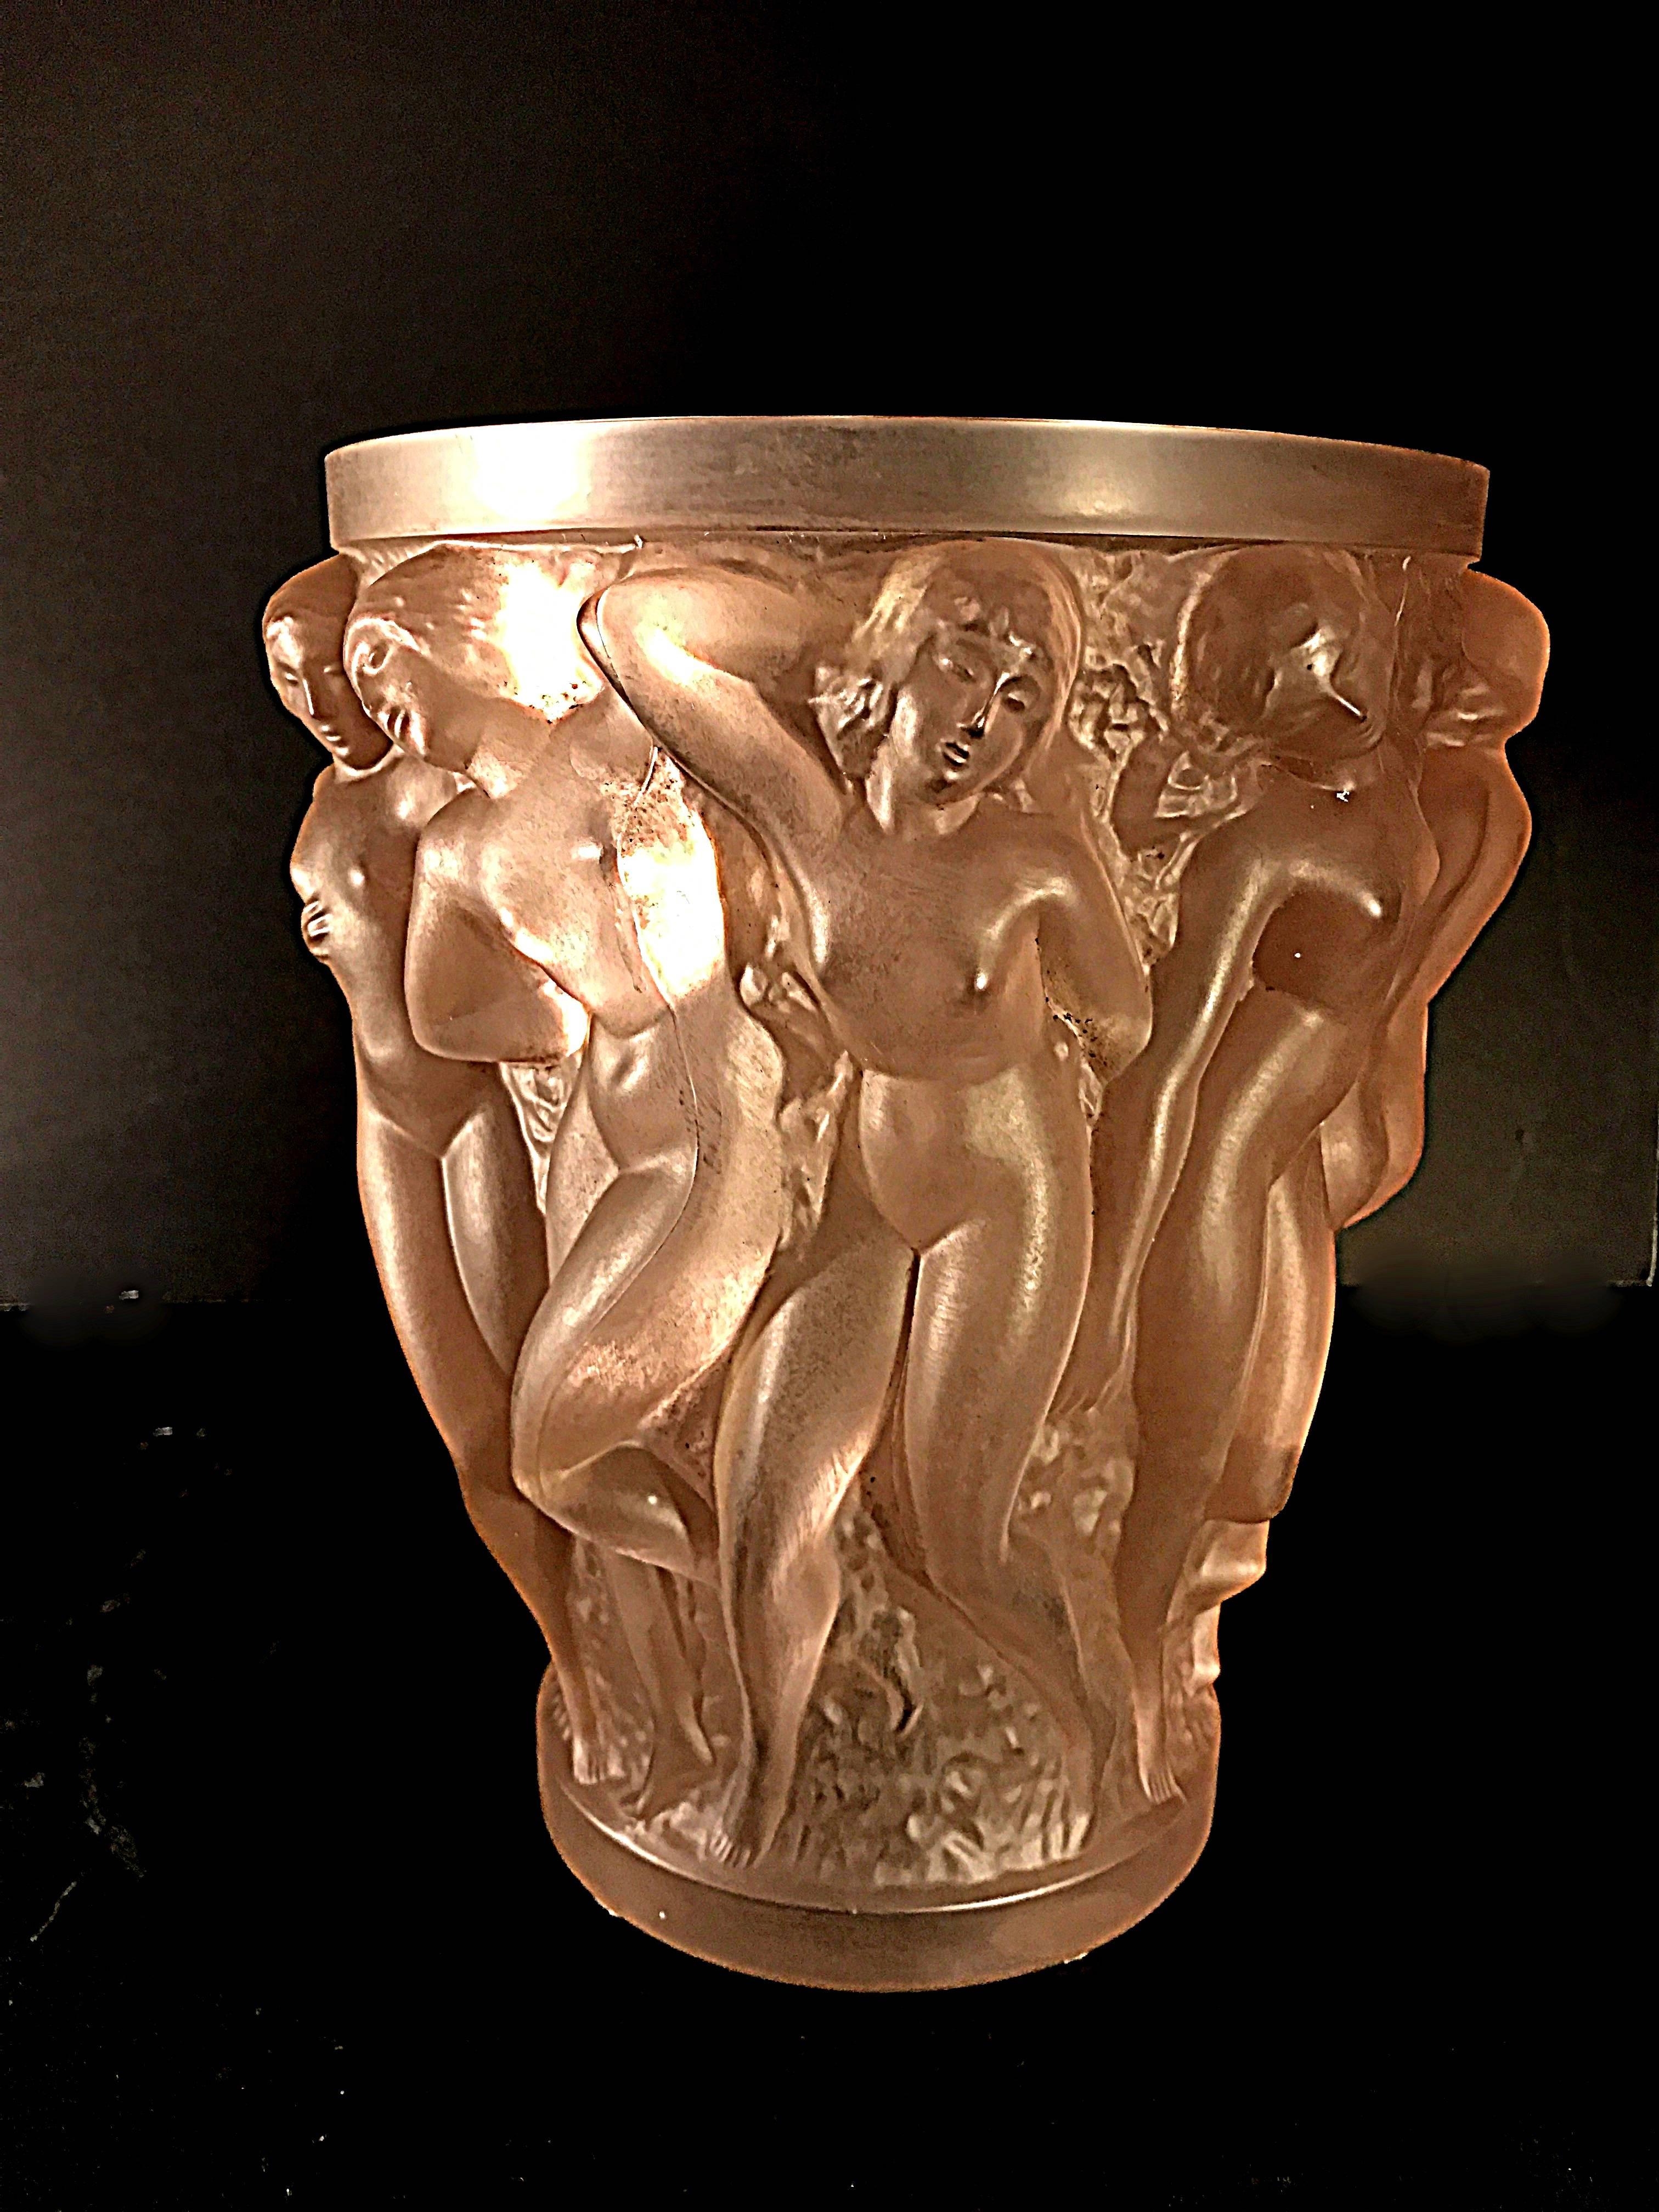 The Bacchantes vase was designed by Rene Lalique on July 22, 1927 and has been in production at Lalique glass ever since. This Bacchantes rose colored
vase is signed Lalique, France.